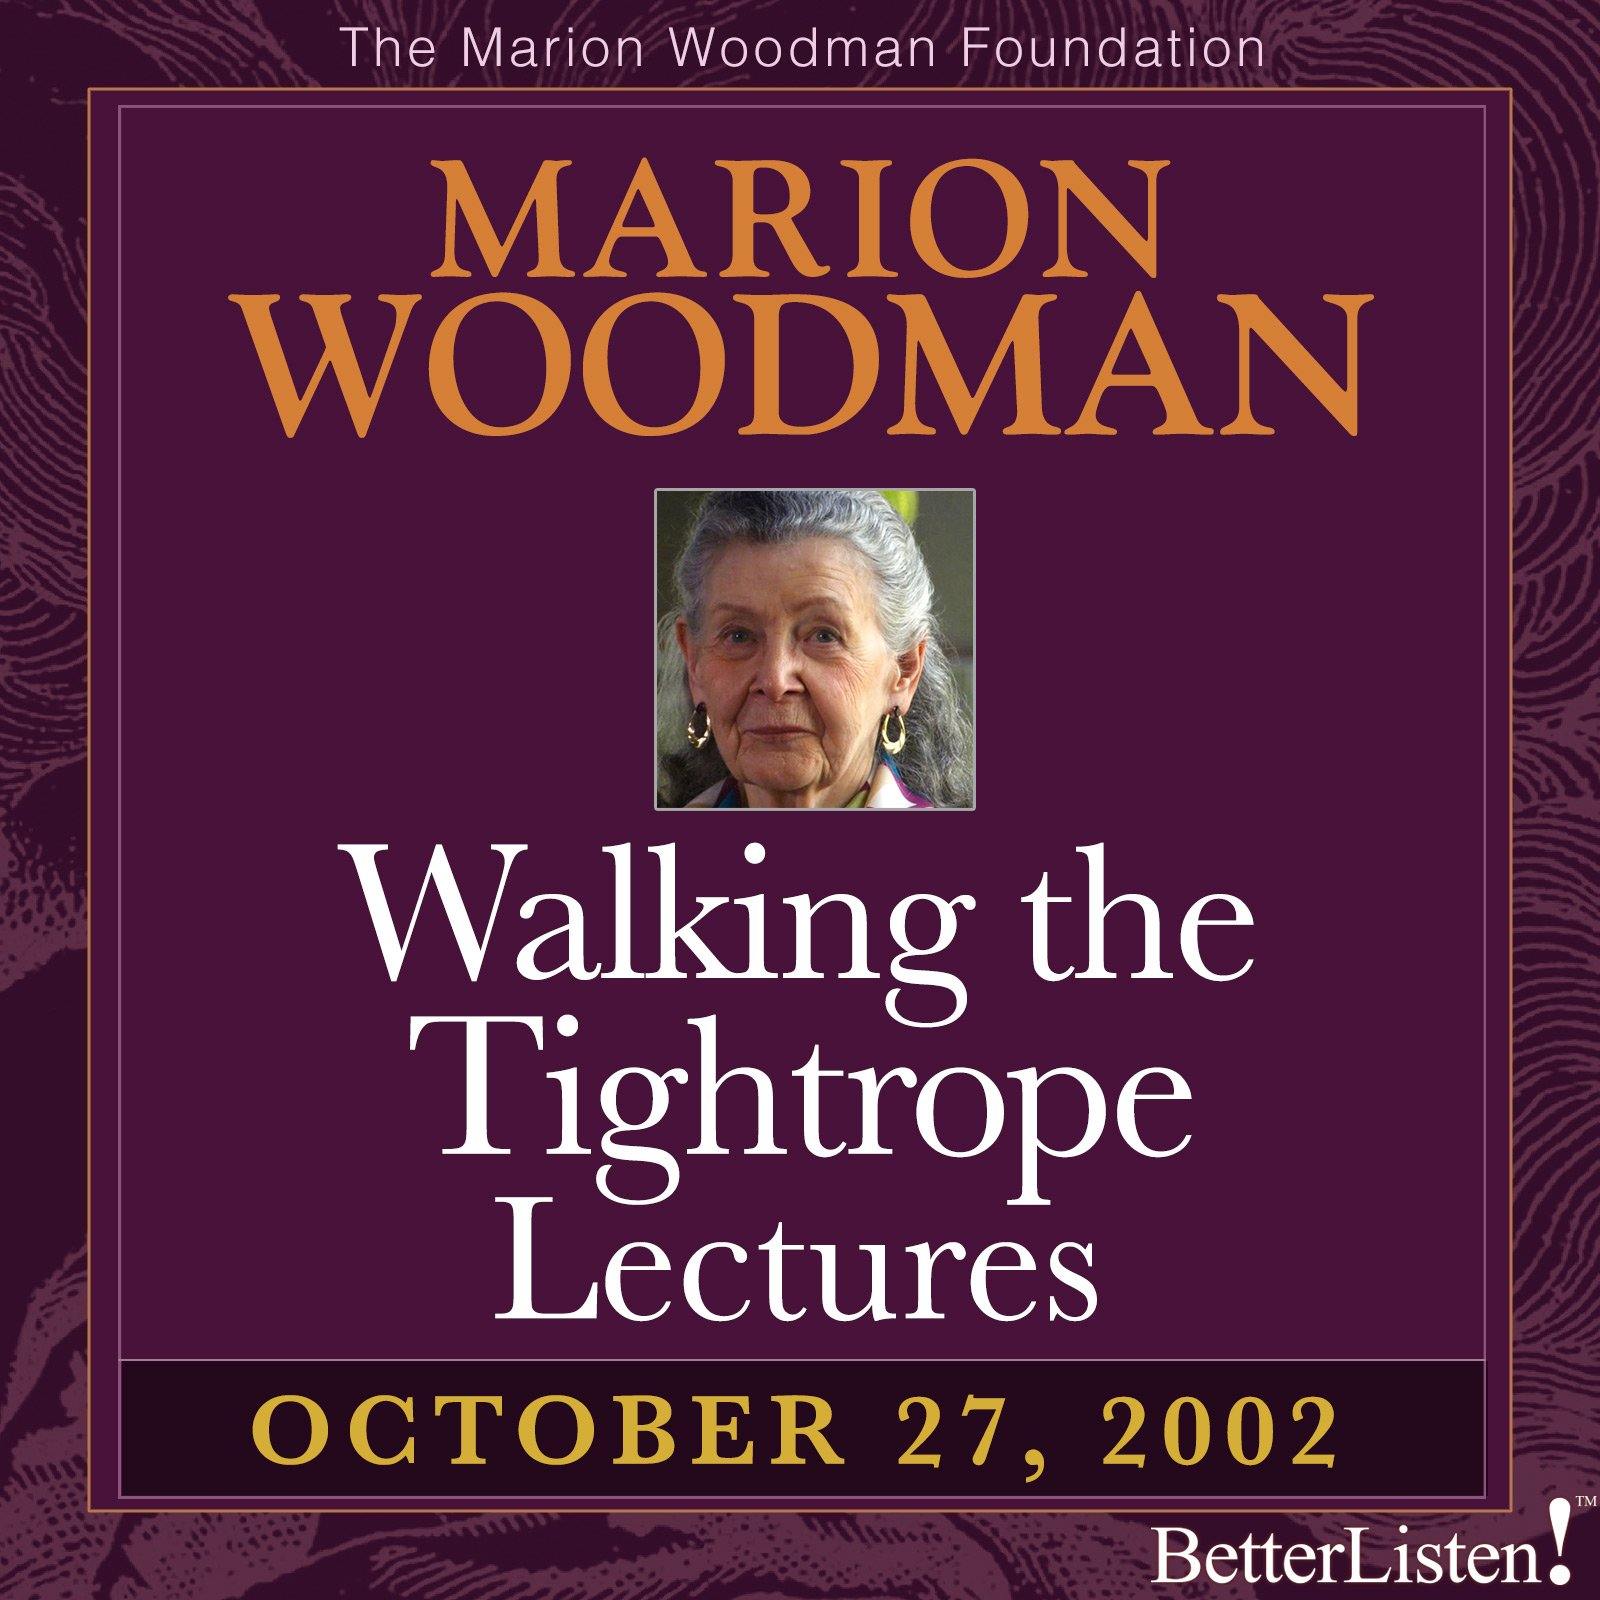 Walking the Tightrope Lectures Marion Woodman #3 - 10-27-02 - BetterListen!